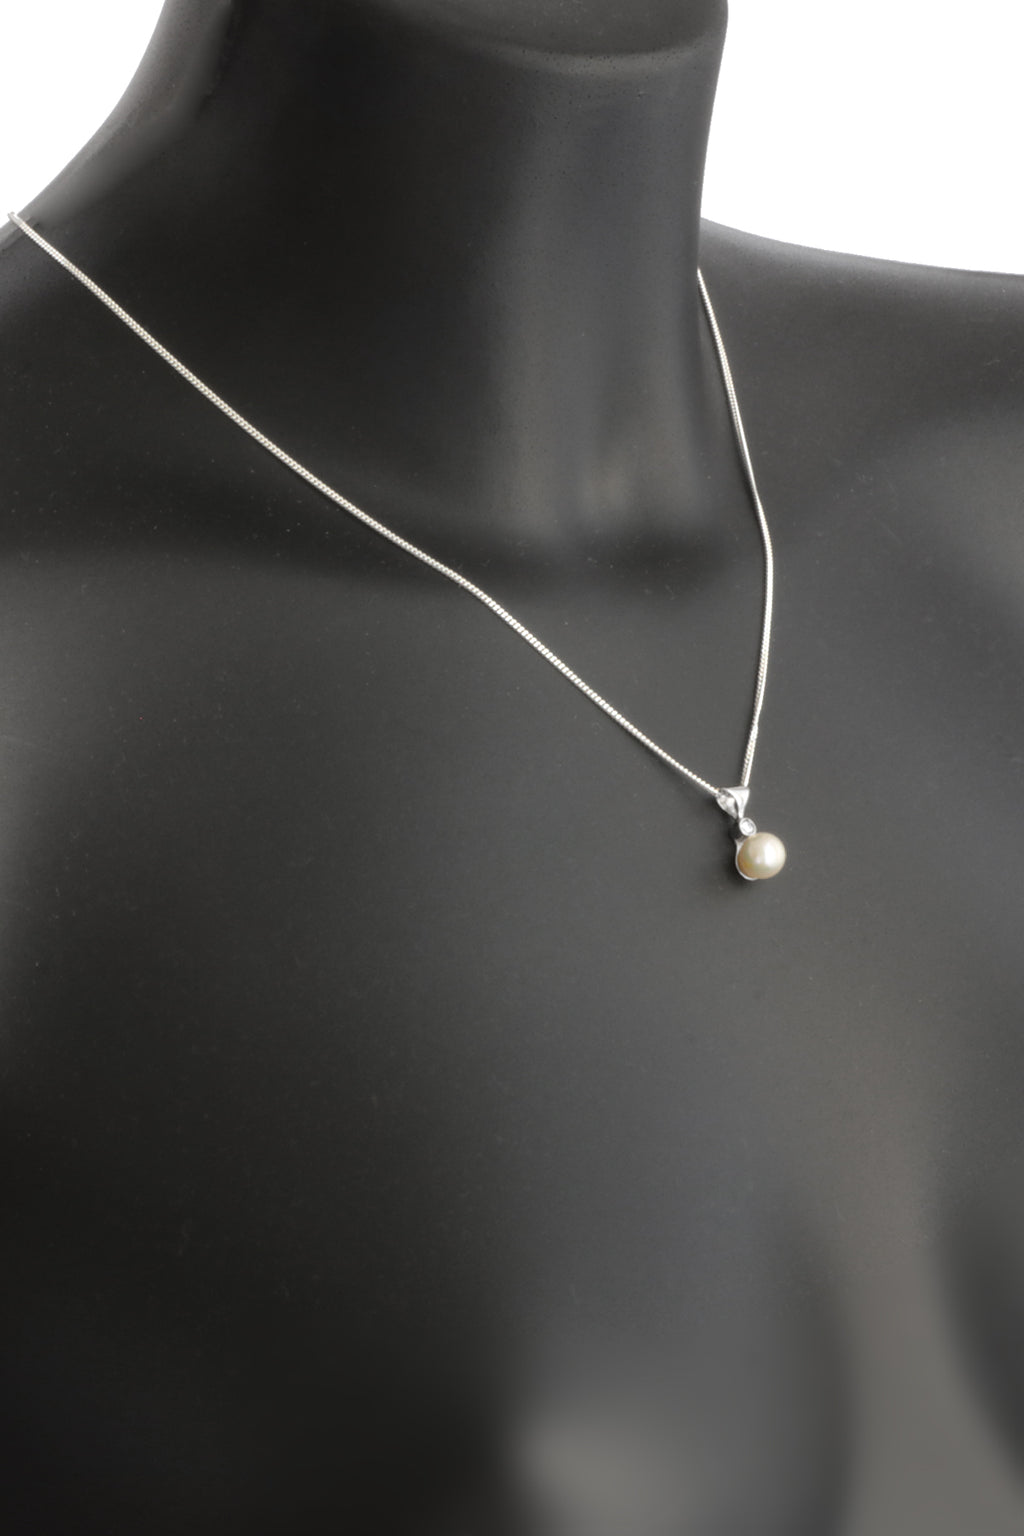 9ct White Gold Pendant with Pearl and Diamond